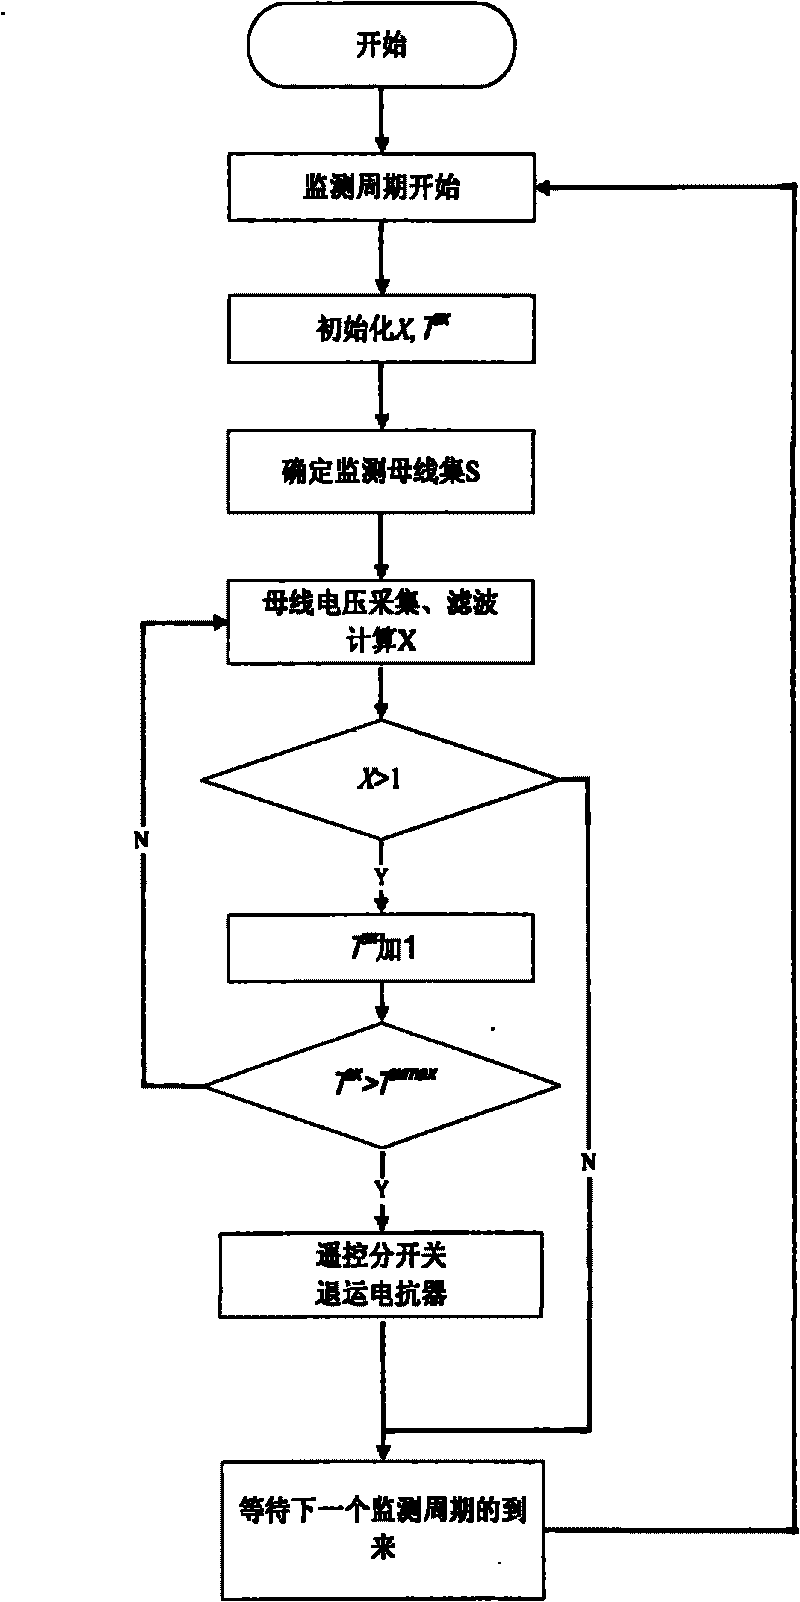 Remote automatic control method of high-voltage shut reactor considering safety of system voltage